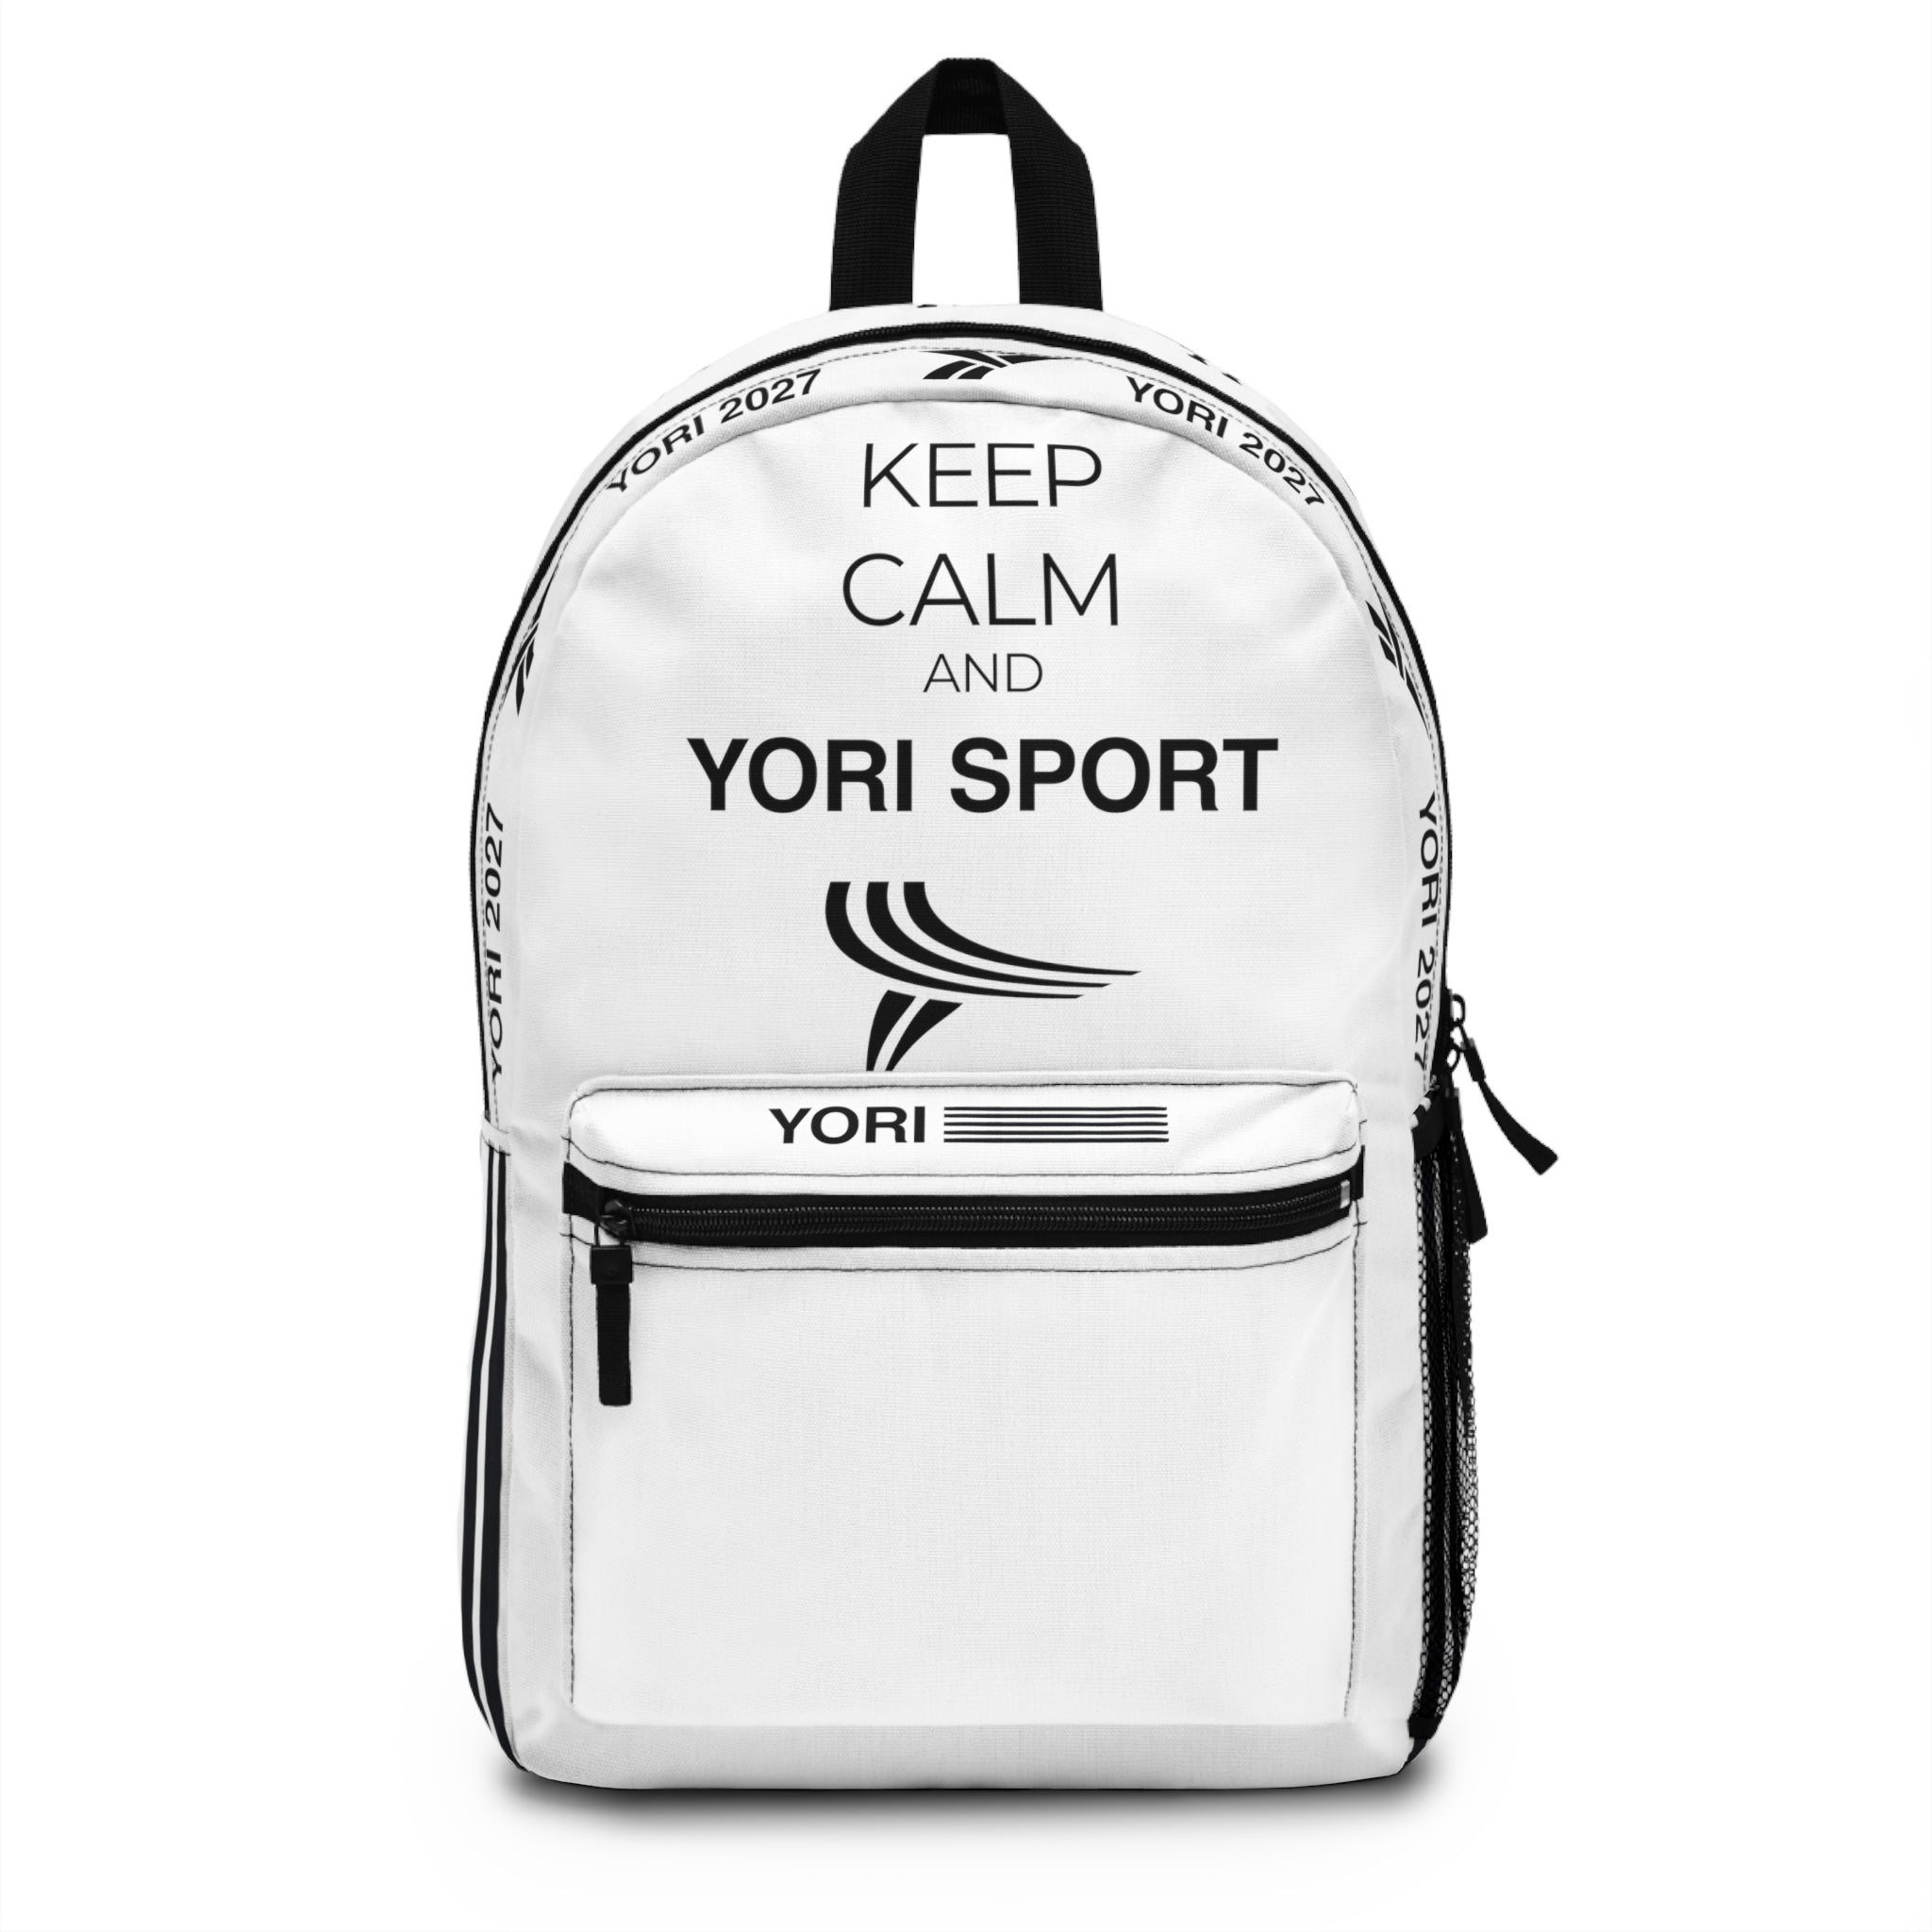 Product Image of 2027 Backpack #1